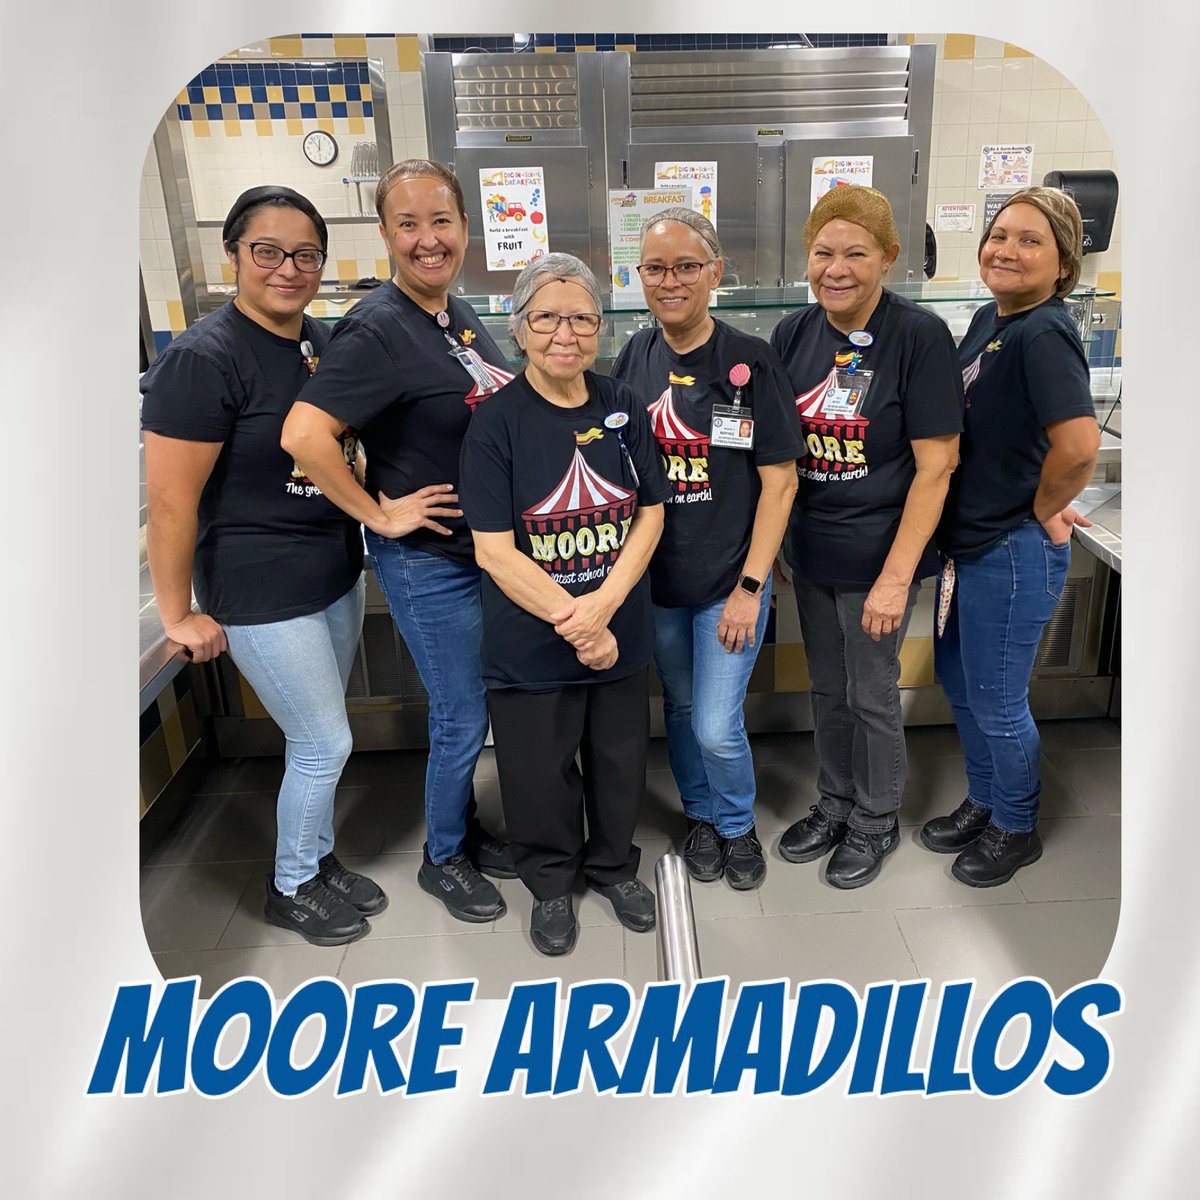 5/25/23 QA @PowerUpDiana  Visiting @MooreCFISD Thank you Raquel & Team. Students celebrate you and your team, smiles, conversations, hugs part of a genuine love atmosphere💗💕💗💕   @CyFairISD @PowerUpCafe  @CFISDnoticias @nokidhungry #Hungerheroes #Nokidhungry @CyFairISD